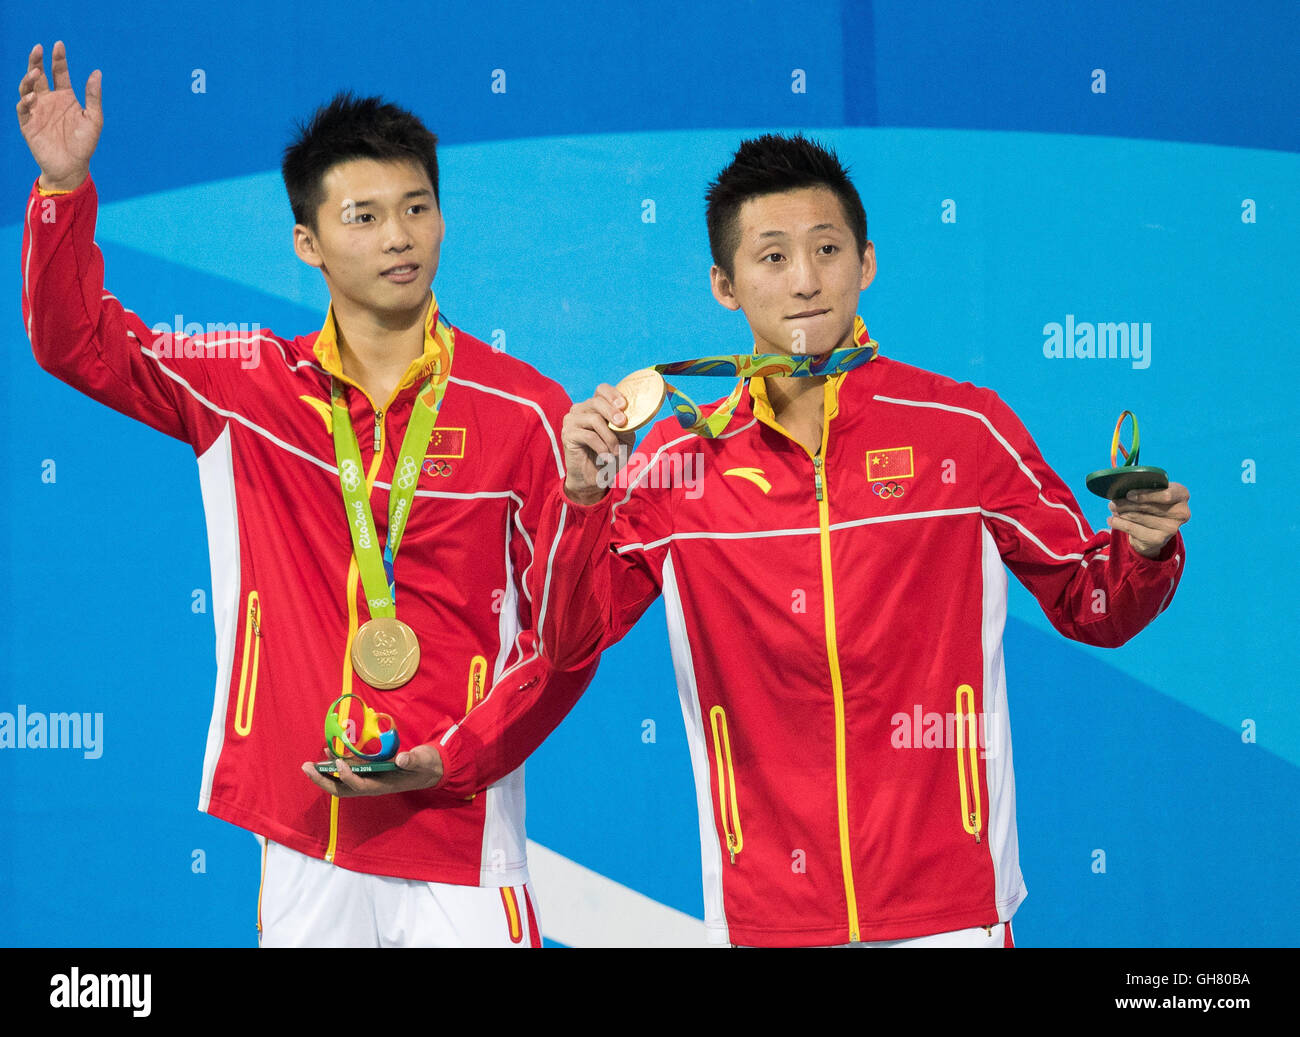 Rio De Janeiro, Brazil. 8th August, 2016. OLYMPICS 2016 DIVING - Chinese CHEN Aisen and LIN Yue win gold in the Olympics Diving 2016 held in the Maria Lenk Aquatic Center. NOT AVAILABLE FOR LICENSING IN CHINA Photo: Marcelo Machado de Melo/Fotoarena/Alamy Live News Stock Photo